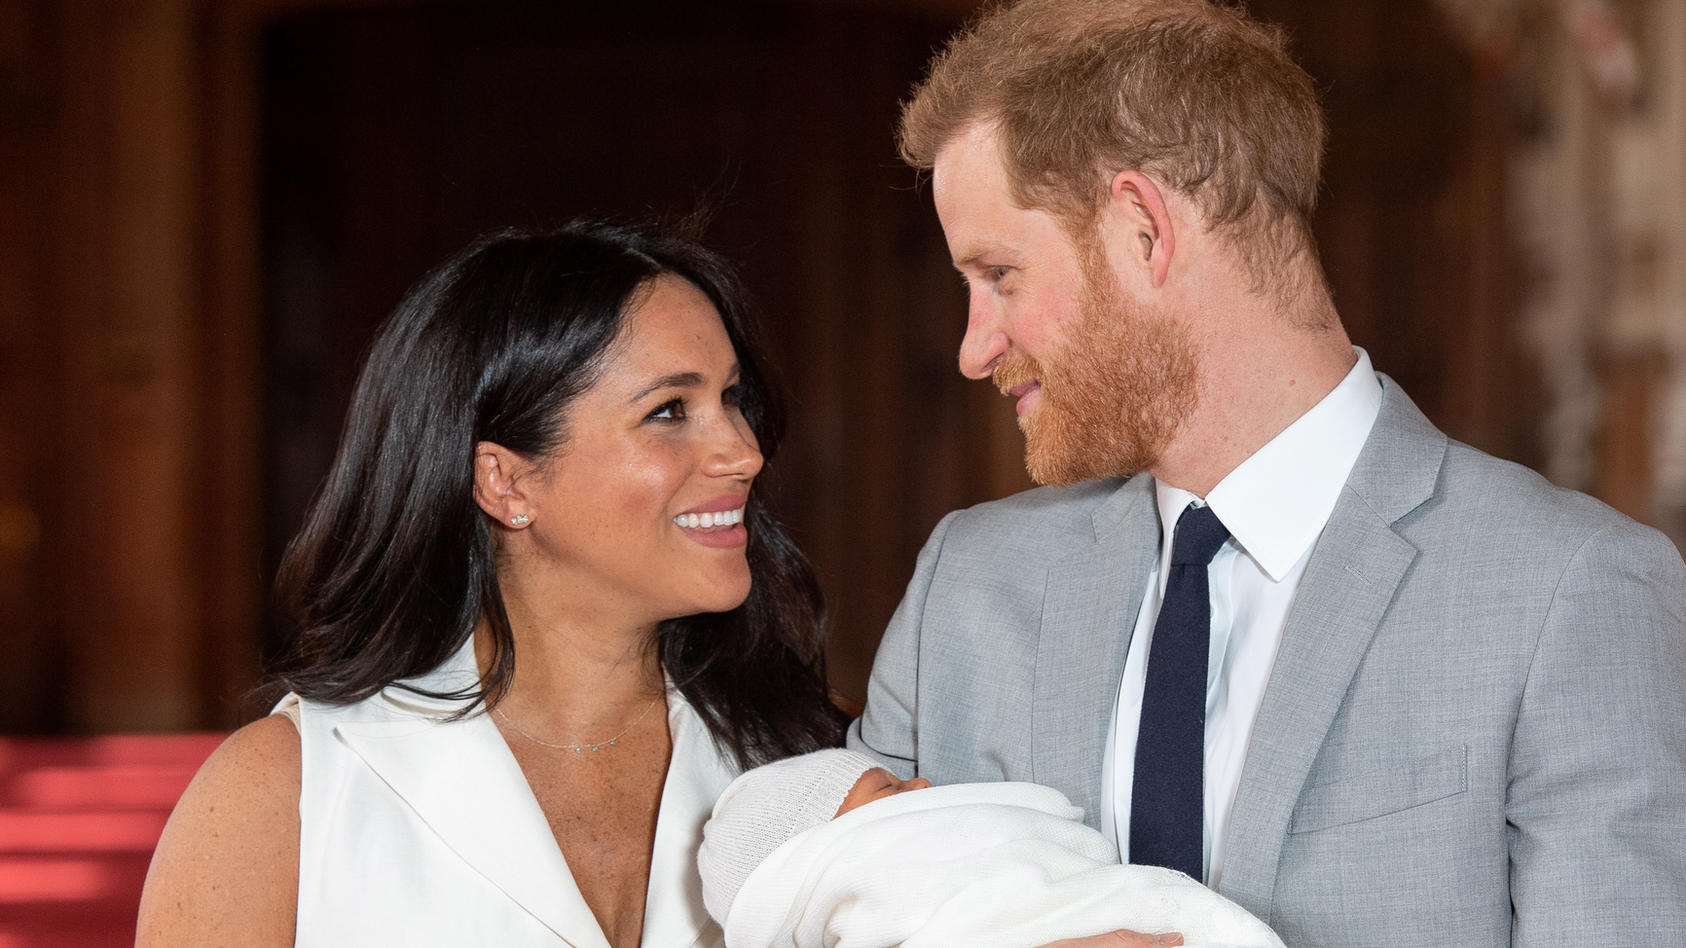 Britain's Prince Harry and Meghan, Duchess of Sussex hold their baby son, who was born on Monday morning, during a photocall in St George's Hall at Windsor Castle, in Berkshire, Britain May 8, 2019. Dominic Lipinski/Pool via REUTERS